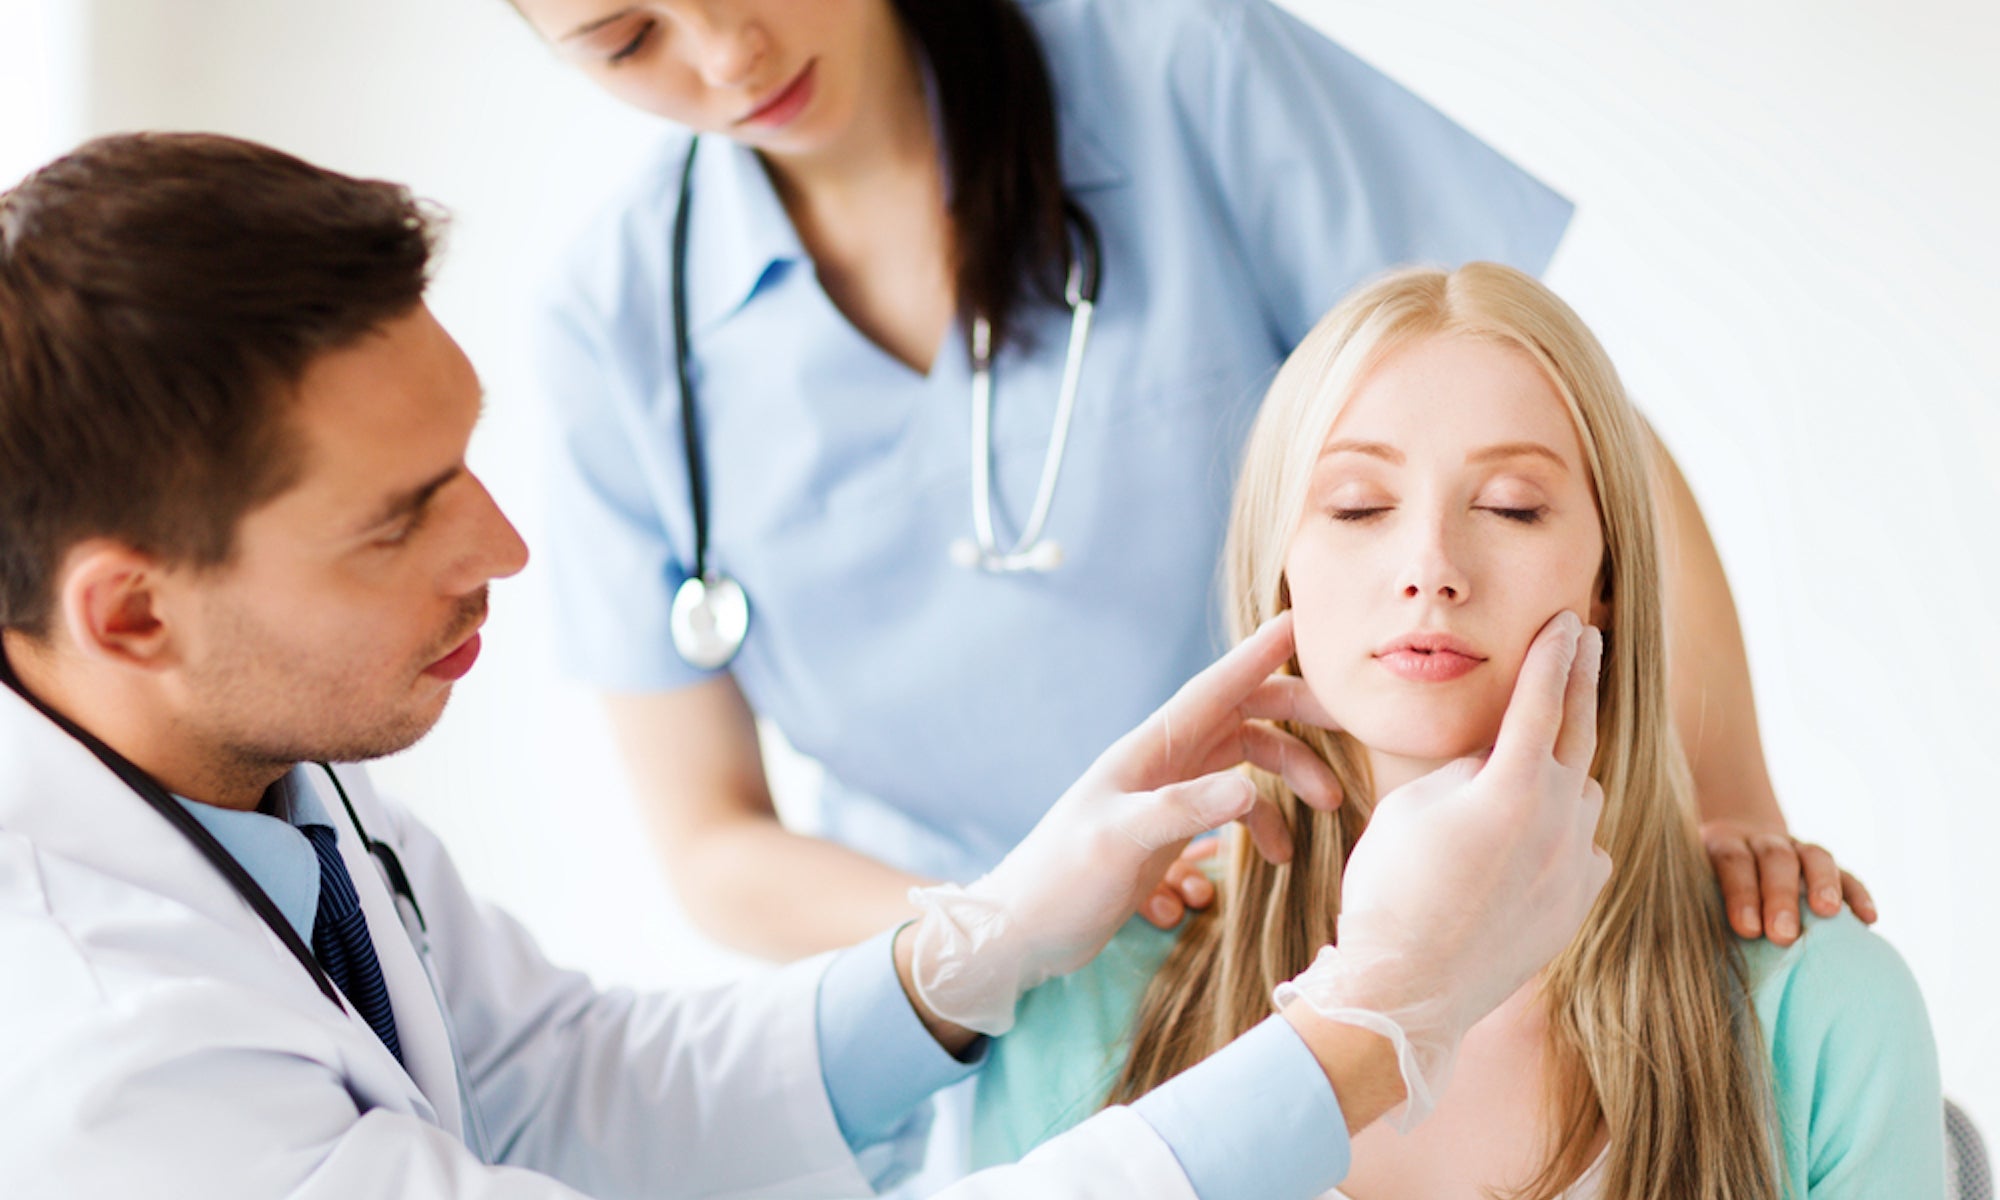 5 Important Tips for Cosmetic Procedure Recovery